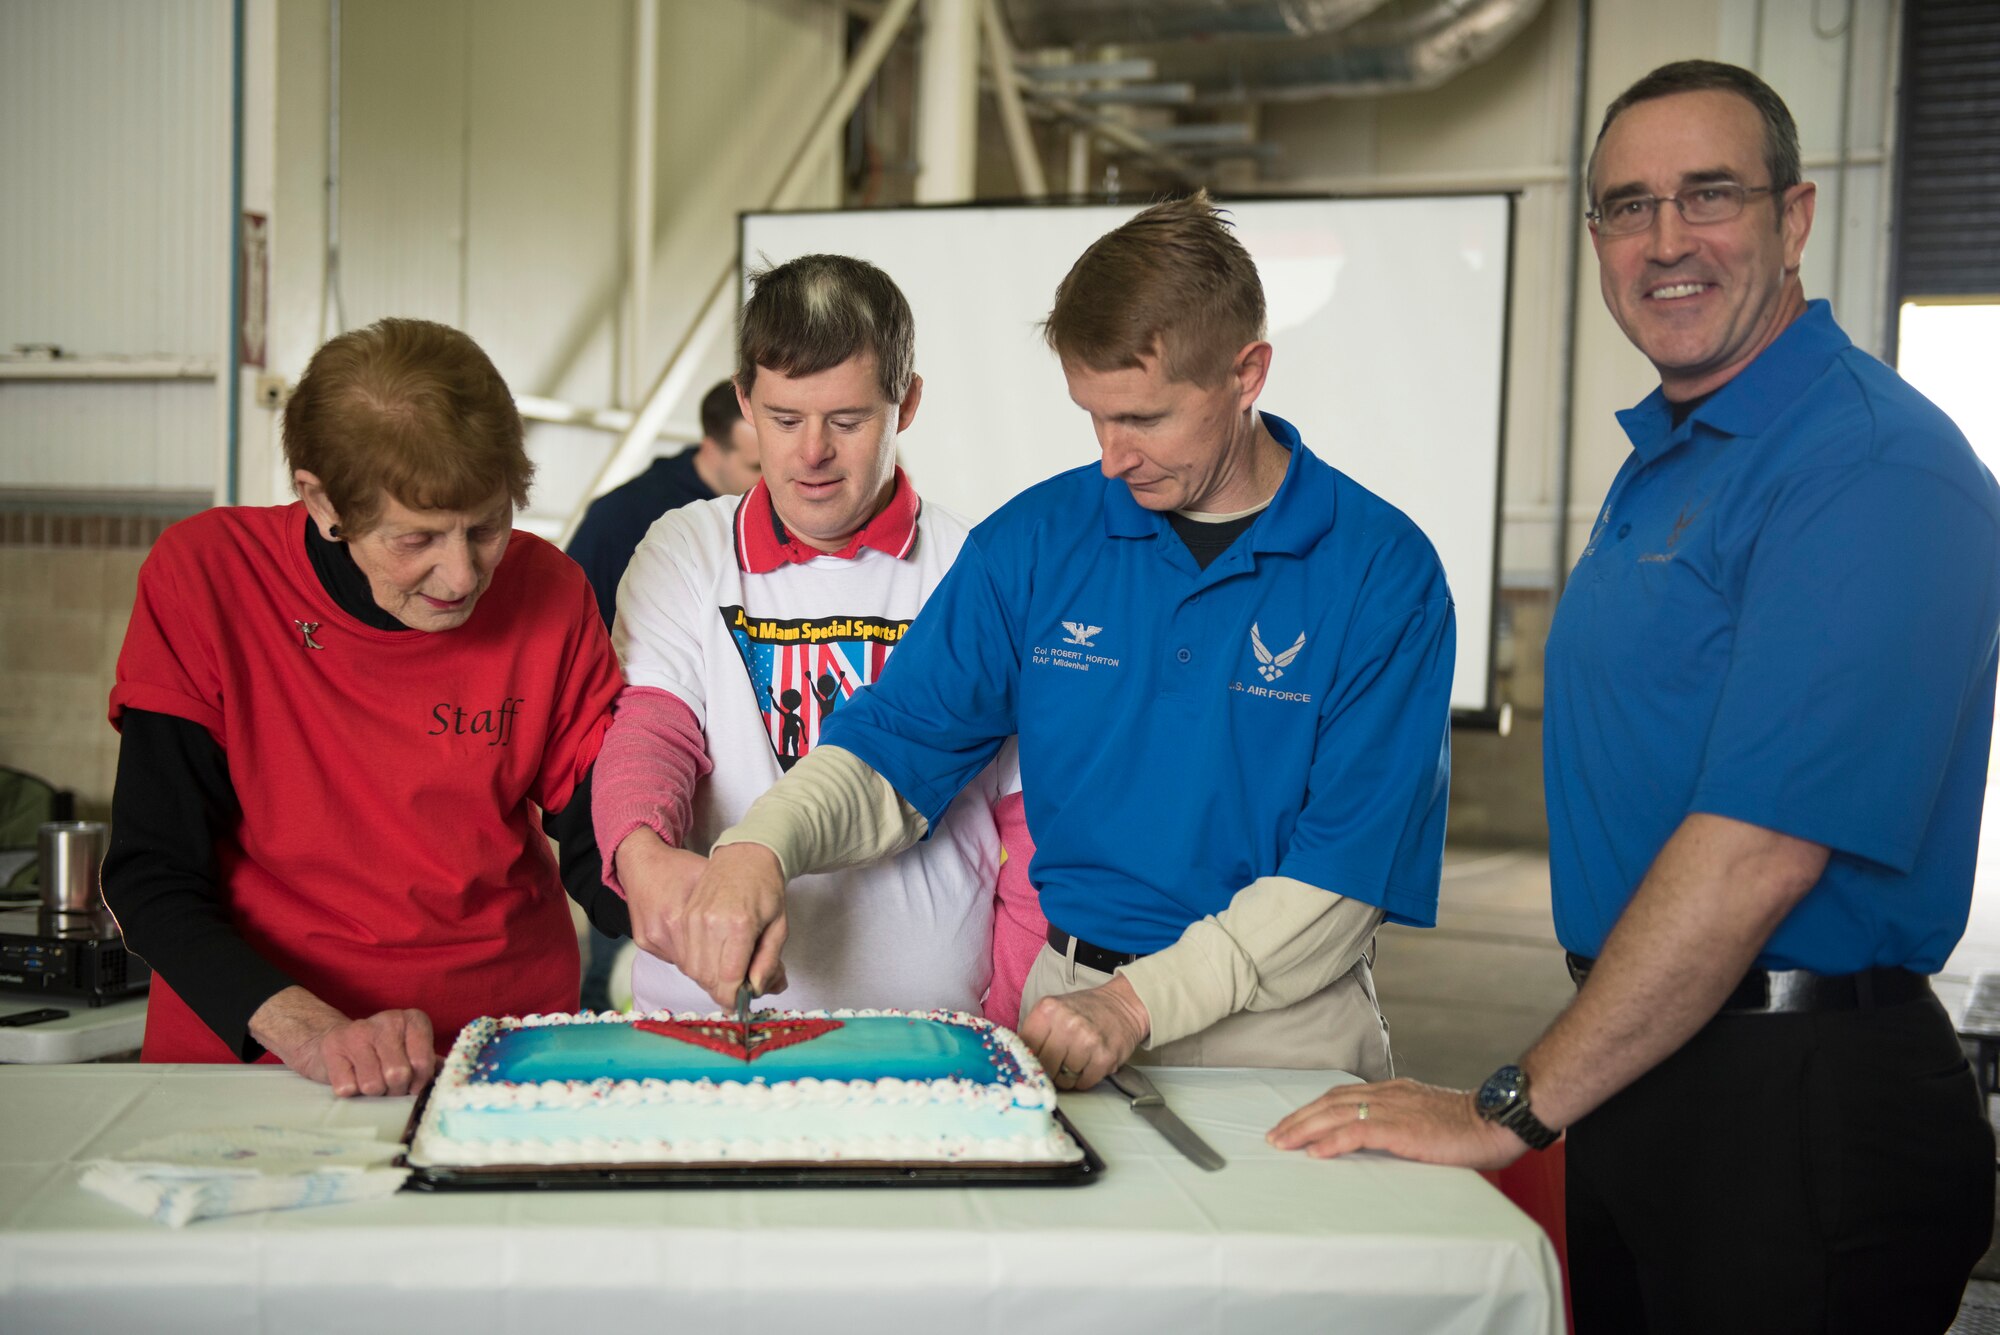 From left to right, Iris Weimer, volunteer; Neil Draper, athlete; U.S. Air Force Col. Robert Horton, 352nd Special Operations Wing vice commander; and U.S. Air Force Chief Master Sgt. Clint Grizzell, 752nd Special Operations Group chief enlisted manager; cut a cake celebrating the 37th Joan Mann Special Sports Day at RAF Mildenhall, England, Sept. 22, 2018.  The event kicked off with an opening ceremony with the lighting of the Olympic torch and closed with medal presentations. (U.S. Air Force photo by Senior Airman Lexie West)